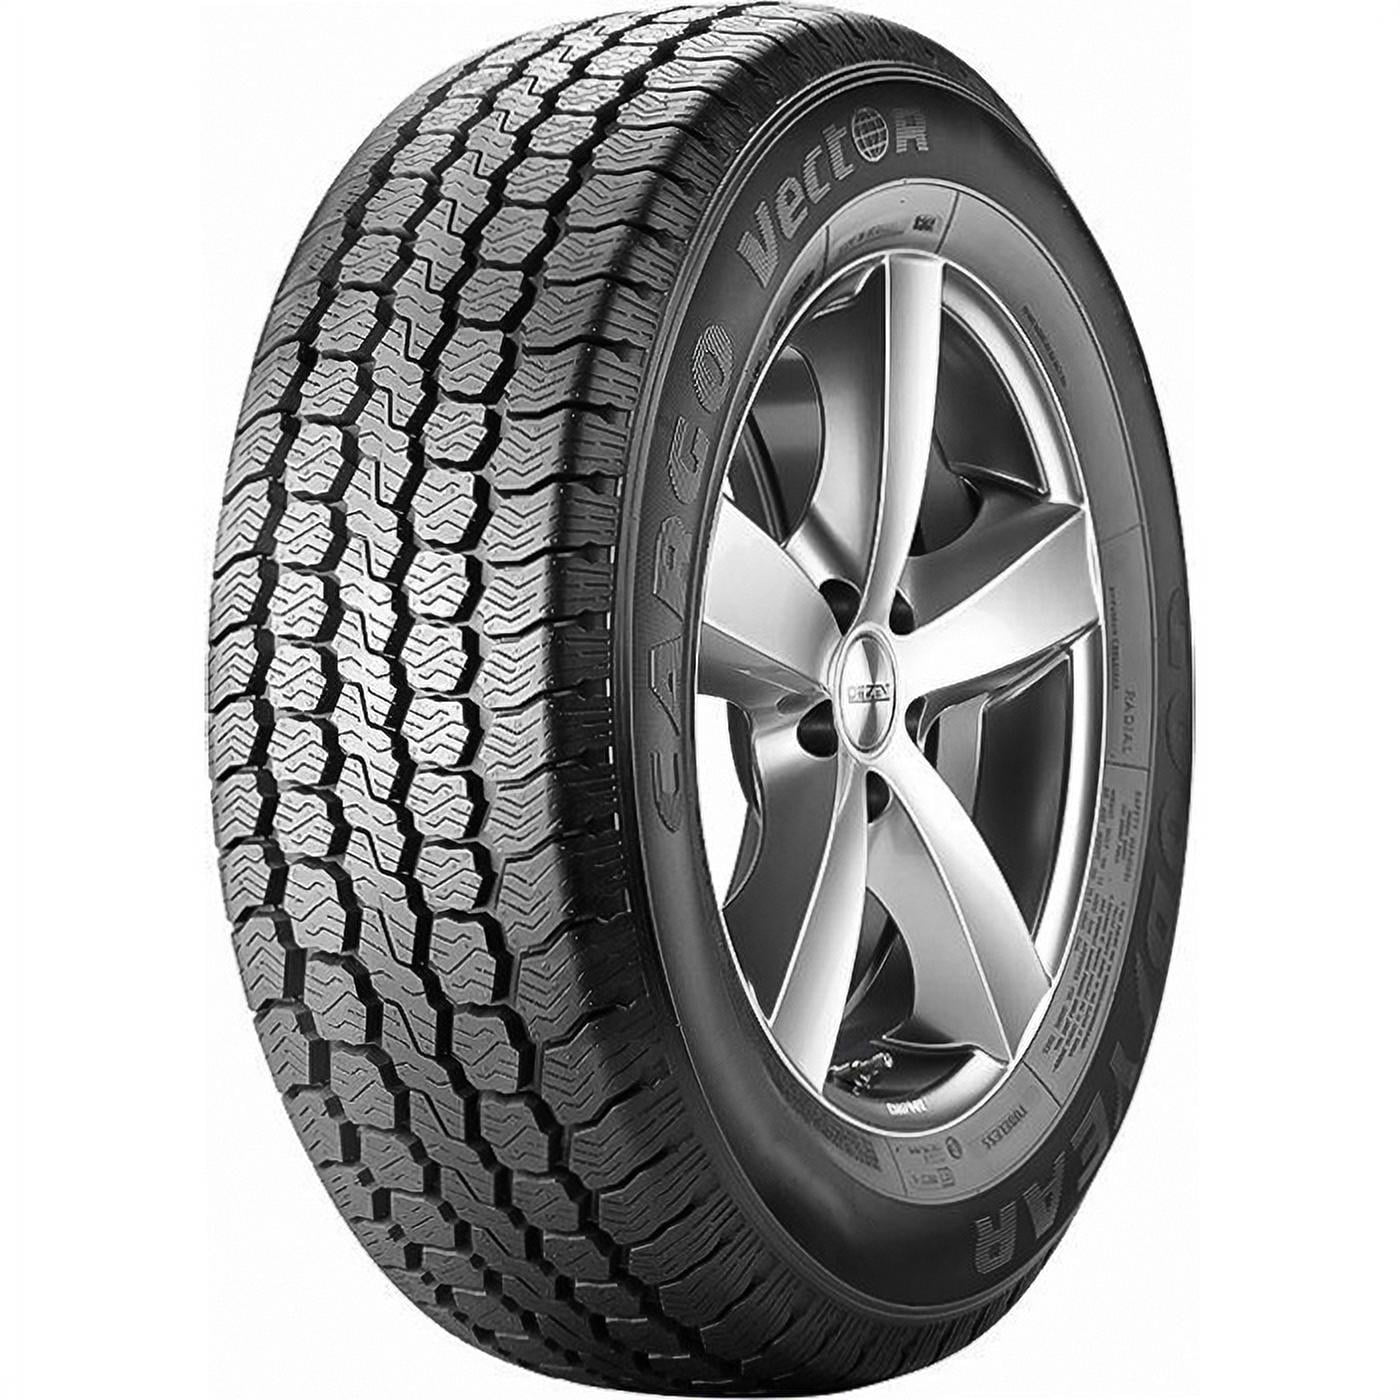 Tire Goodyear Cargo Vector 285/65R16 Load D 8 Ply Commercial